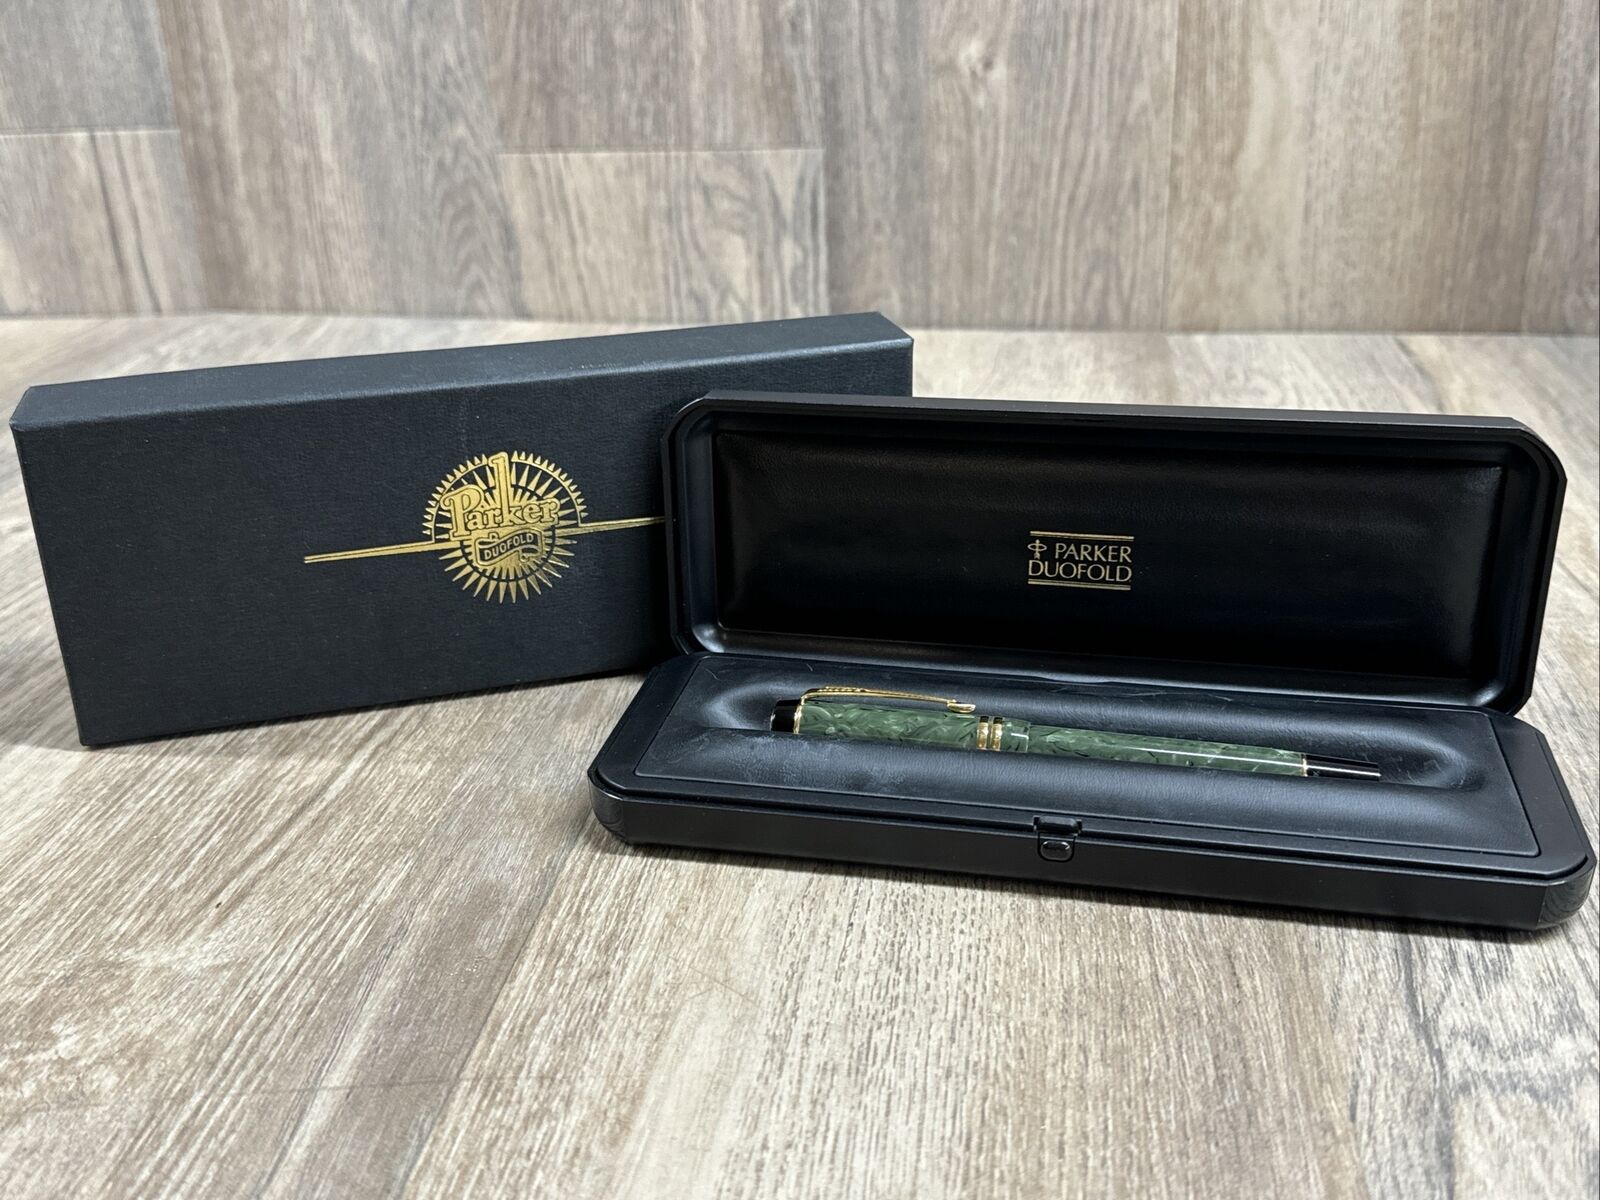 PARKER JADE DUOFOLD 18K NIB FOUNTAIN PEN with Boxes